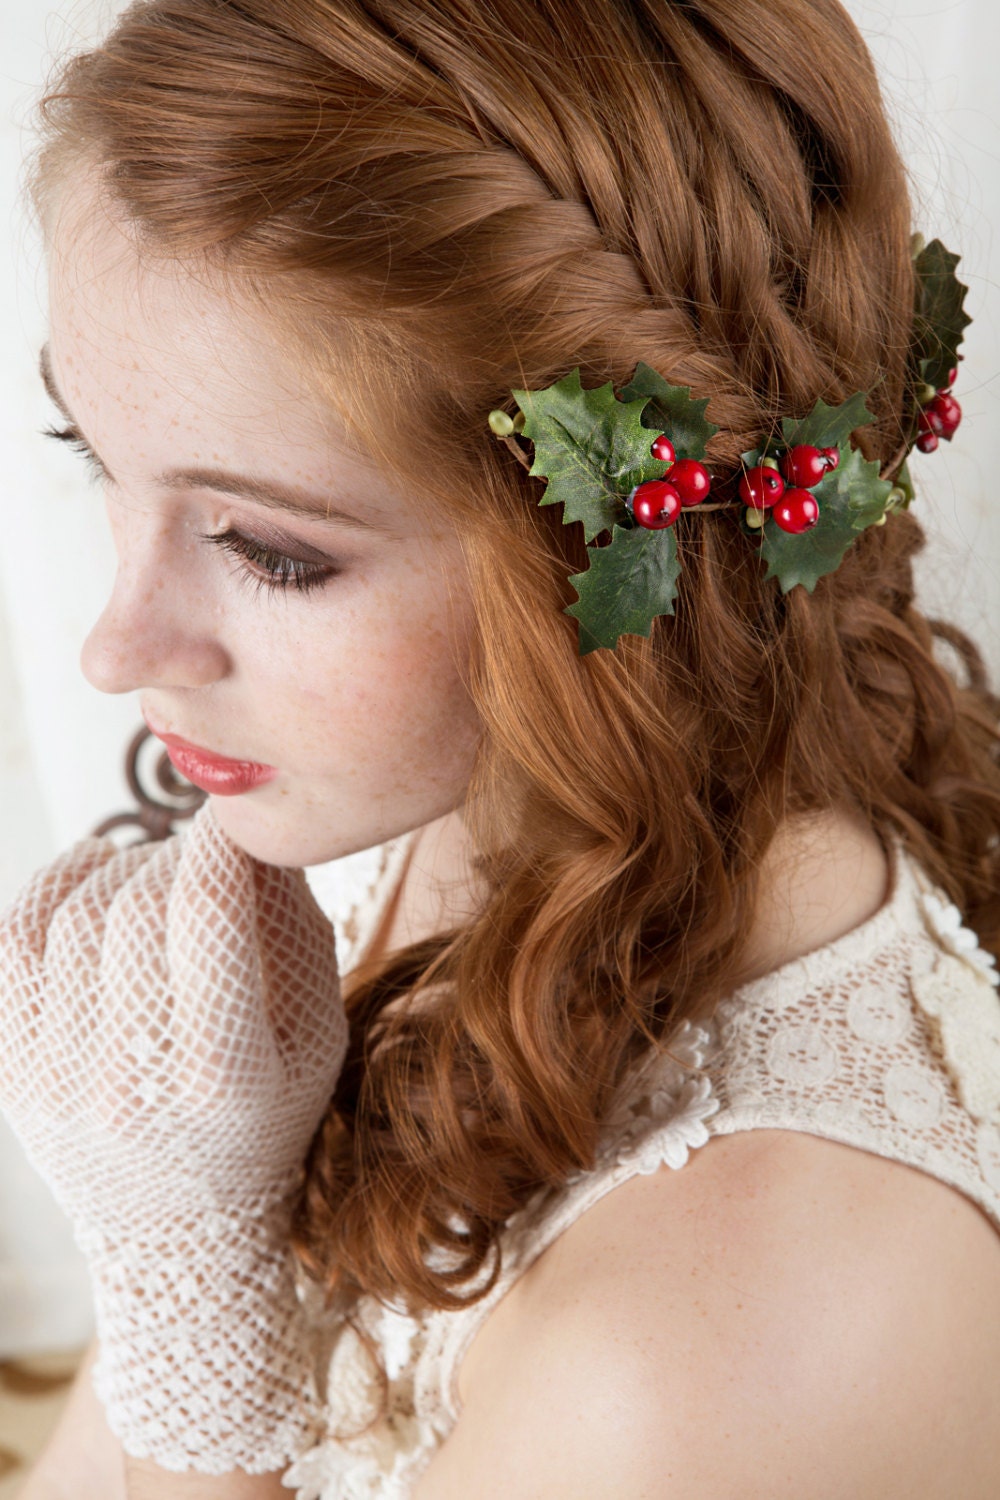 holly hair accessories, christmas hairpiece, holly berries hair clip -MERRILY- green holly leaves, red hair accessory, headband headpiece